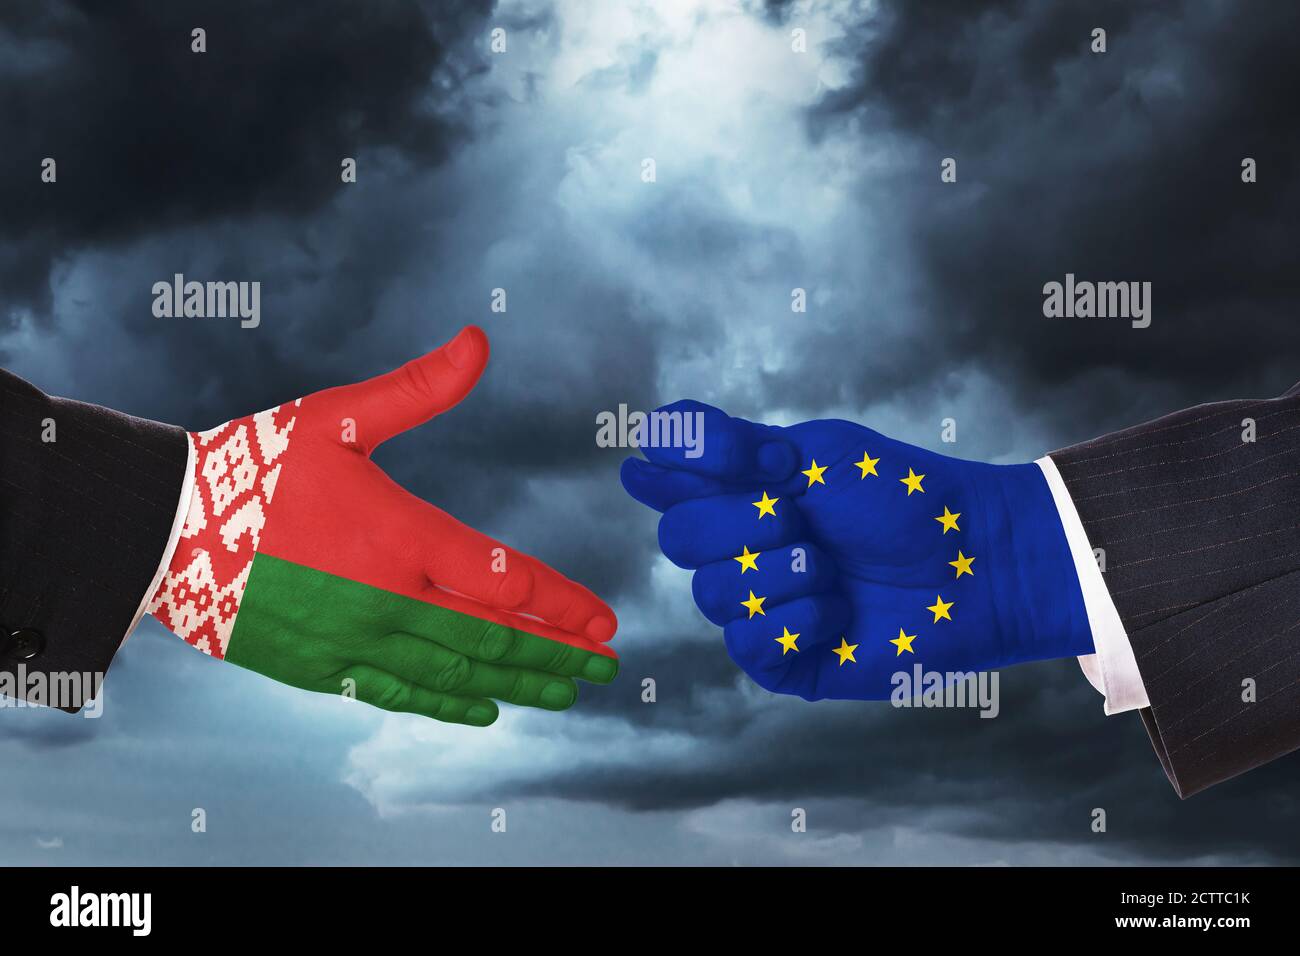 Hands on the background of a stormy sky. Concept on the topic of a proposal for friendship and difficult relations between Belarus and the European Un Stock Photo